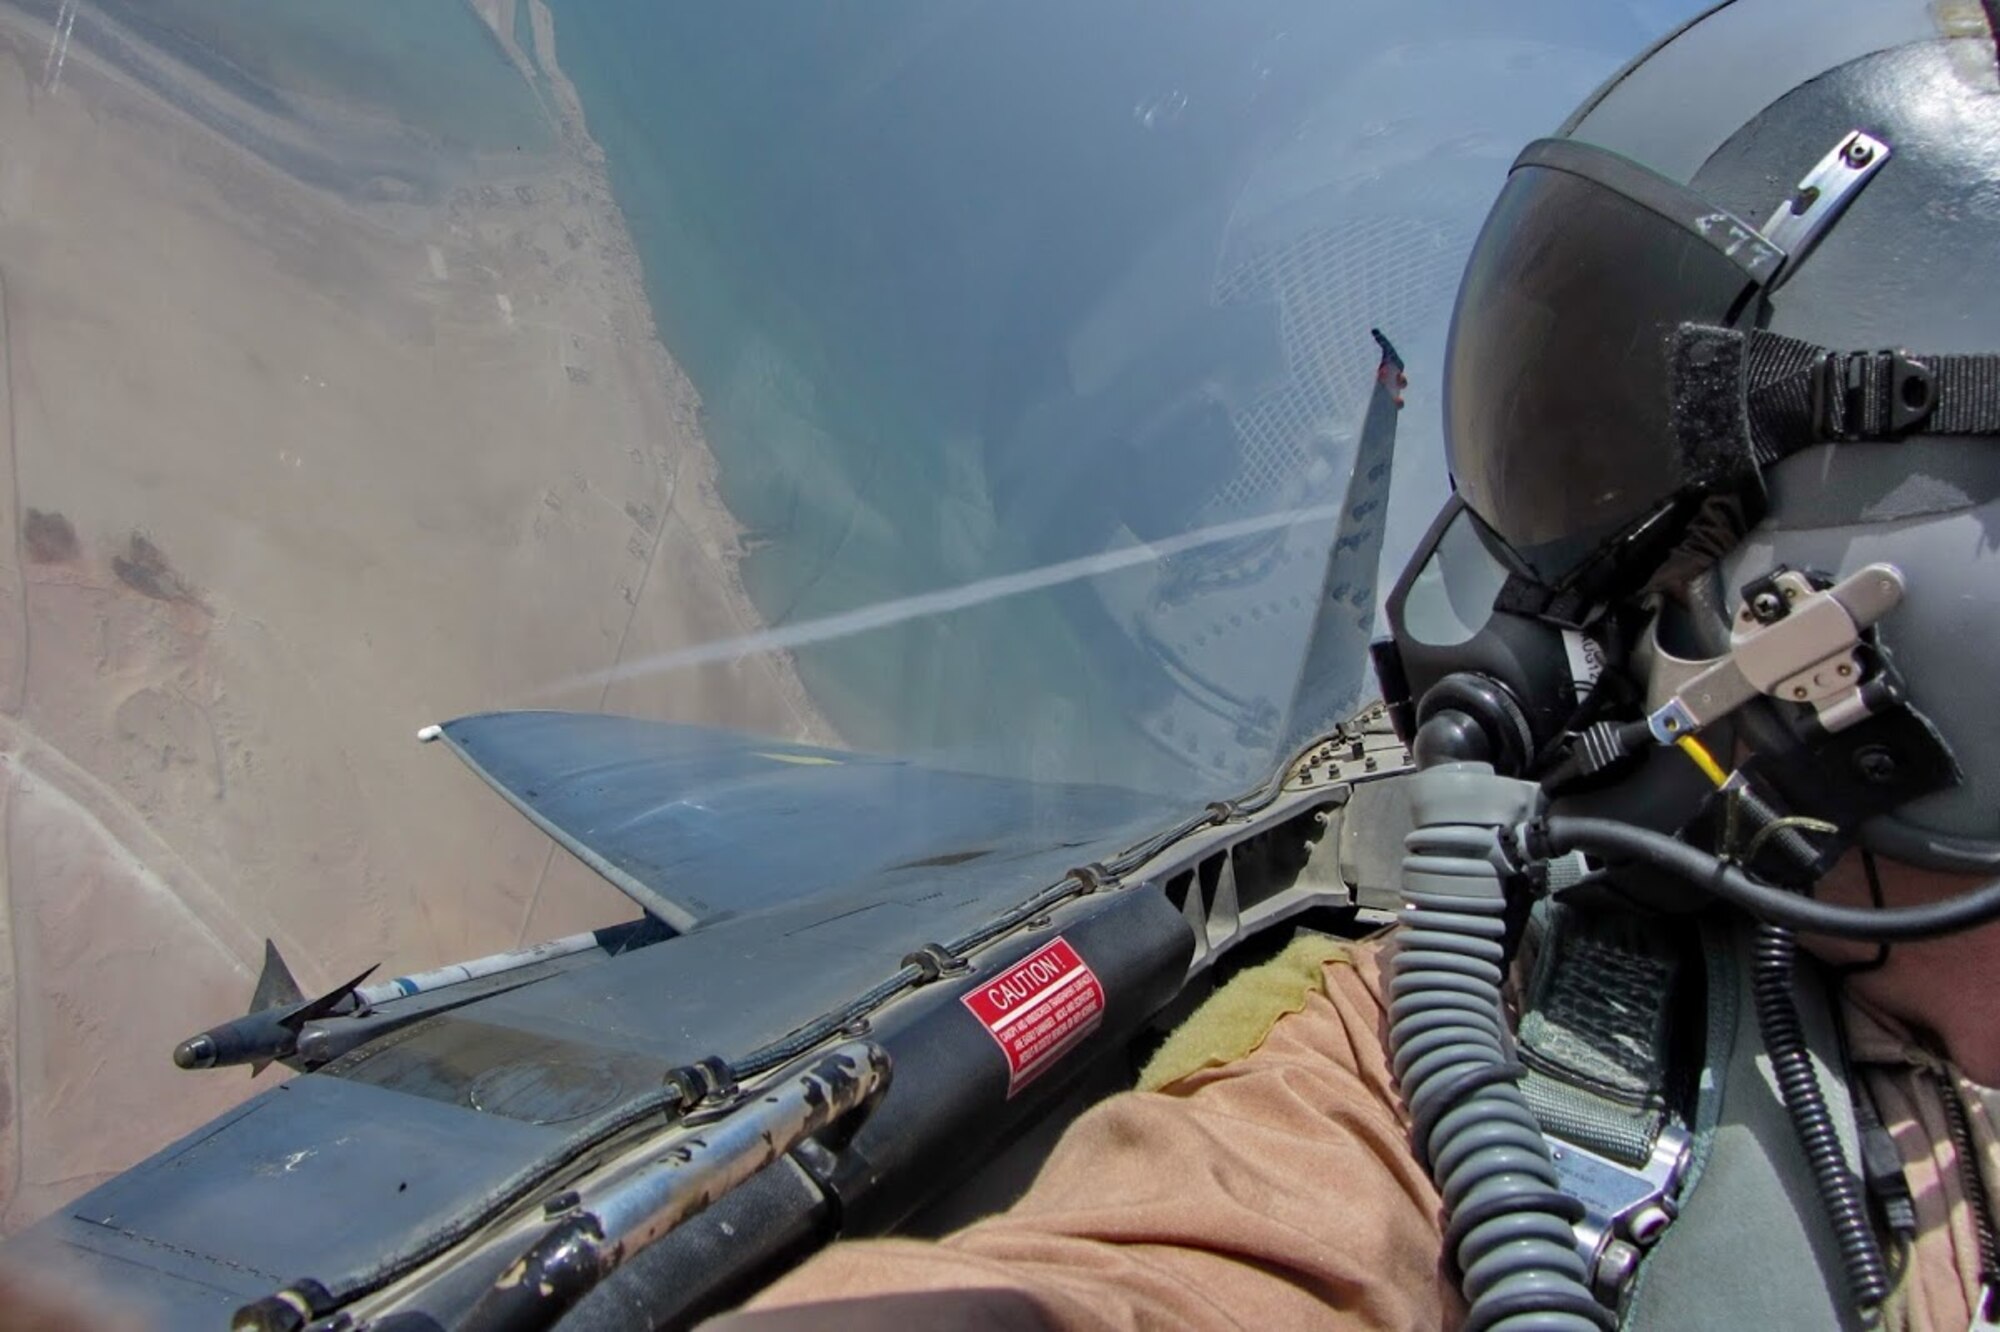 Col. Paul DeFlorio flying in an F-15 Strike Eagle above the Gulf of Aden, July 26, 2012. DeFlorio is the director of the Operational Graduate Medicine Education, or OGME, program where students are awarded flight surgeon wings and become rated aviators upon completion. The OGME program establishes a training pipeline that prepares and fields new flight doctors to support U.S. Air Force and Joint operations across the globe. (U.S. Air Force photo / Col. Paul DeFlorio)